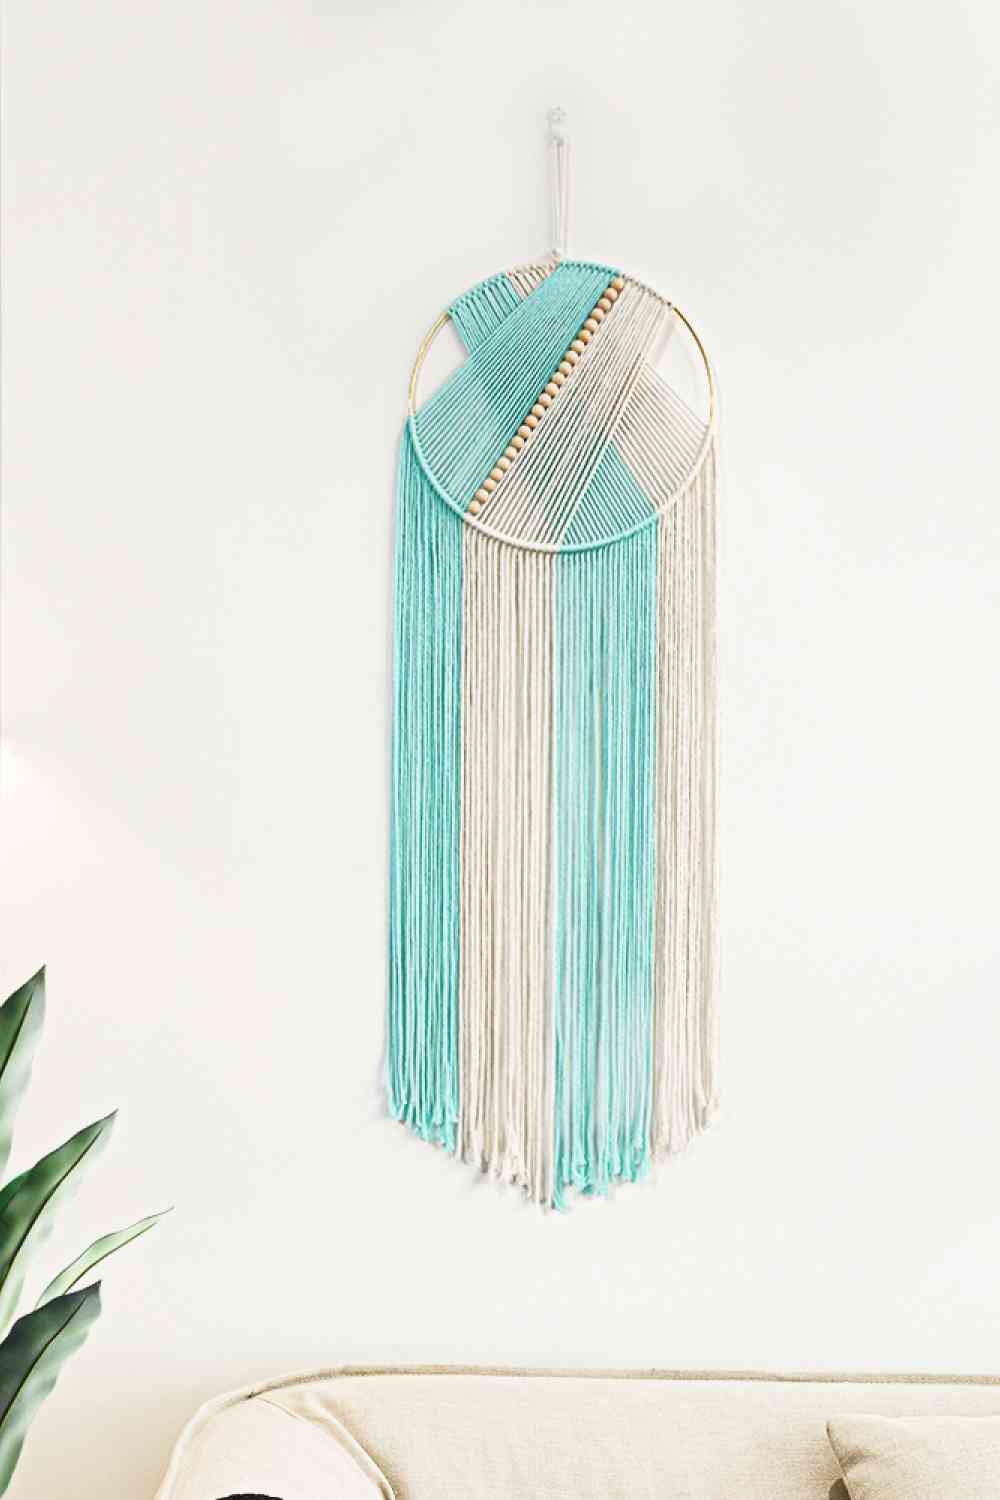 Contrast Macrame Hoop Wall Hanging Tiffany Blue One Size